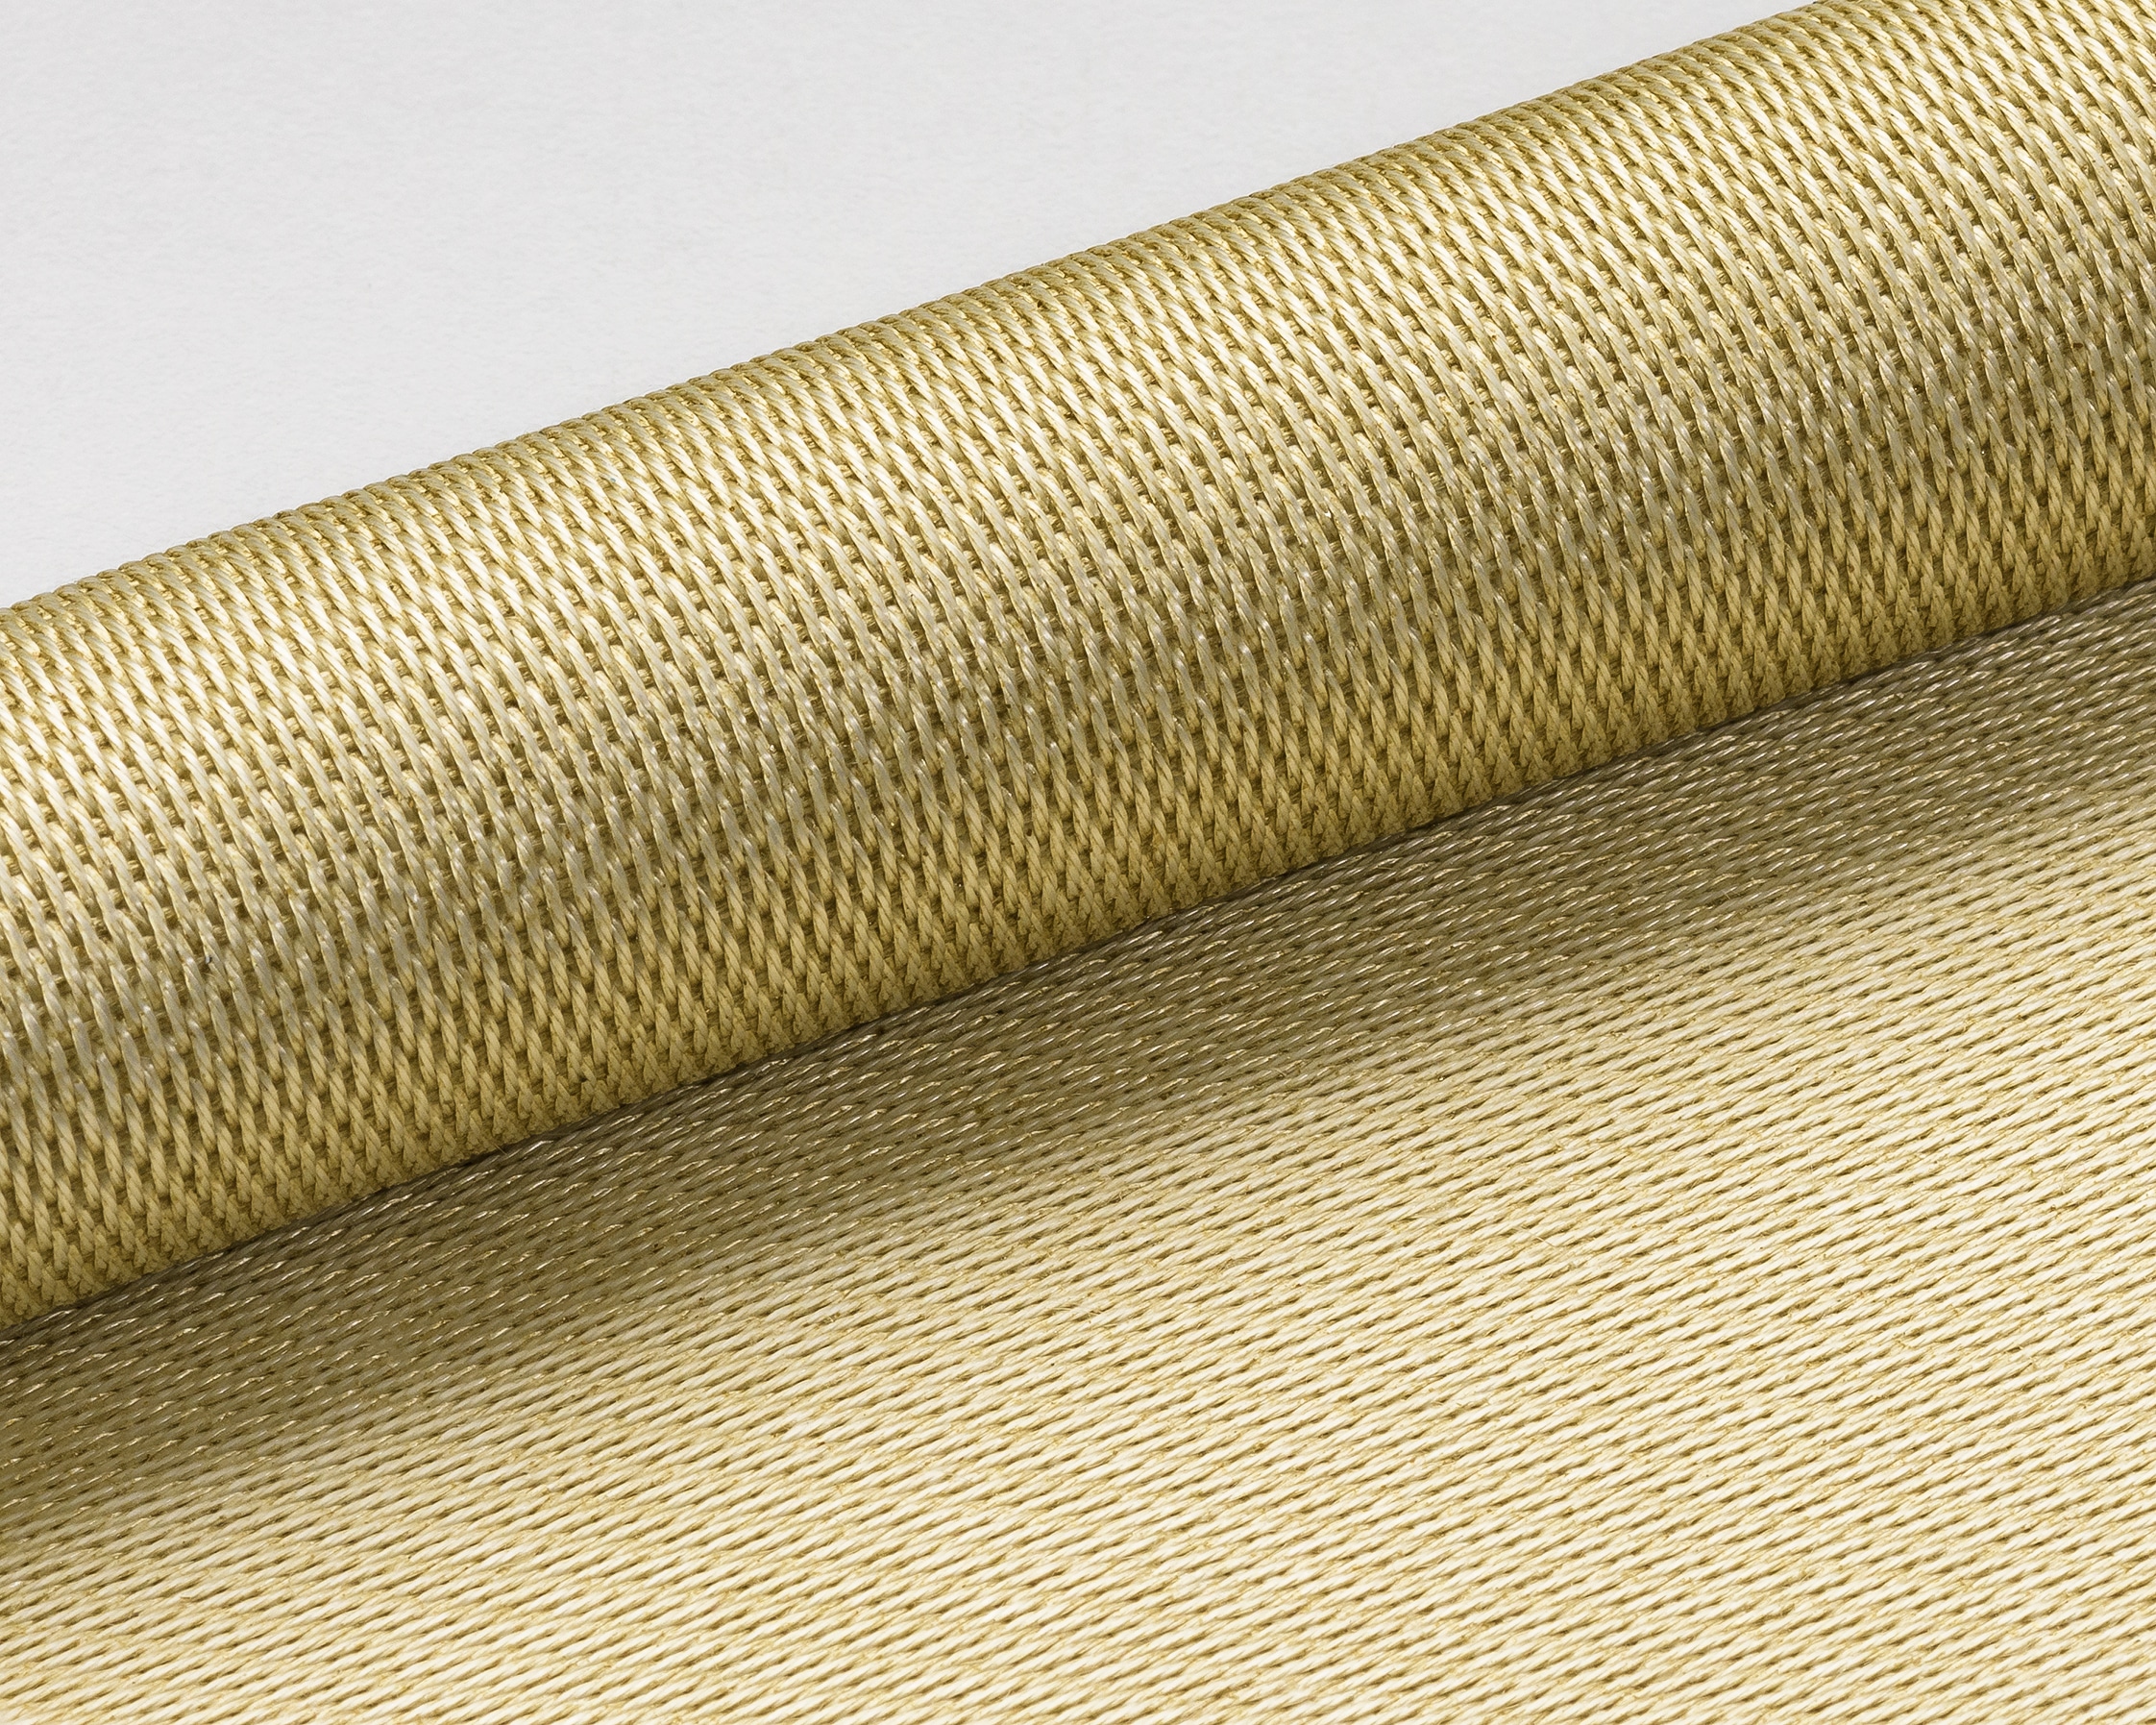 High temperature insulating textiles manufactured by Apronor